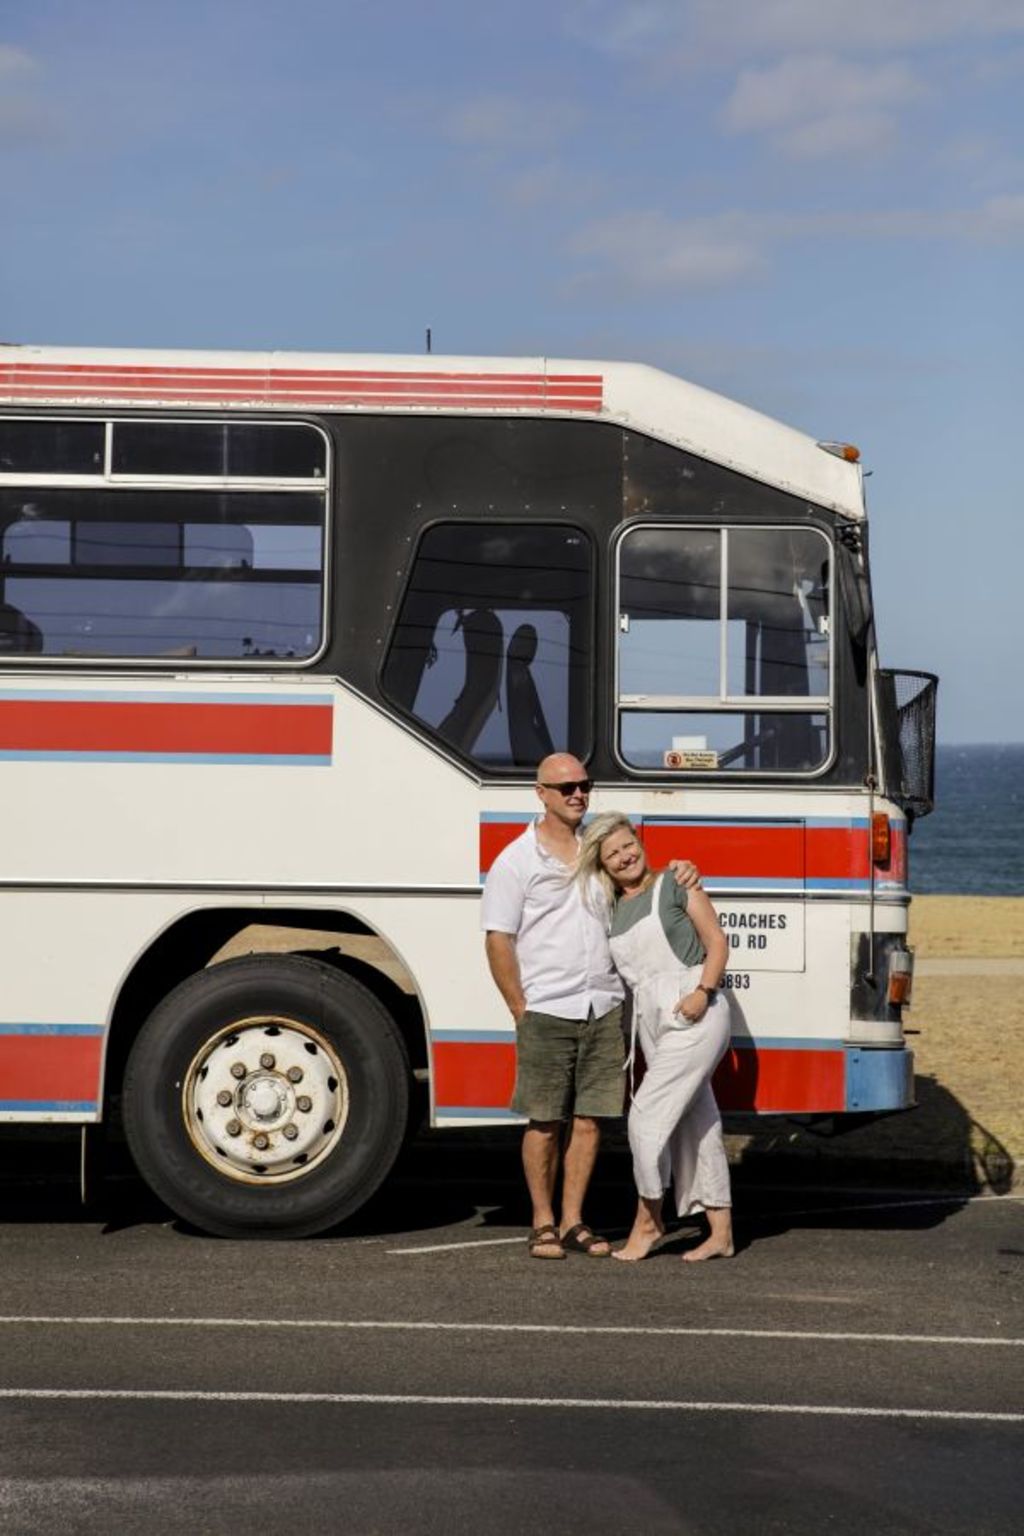 How a leading furniture maker turned an old bus into a home on wheels